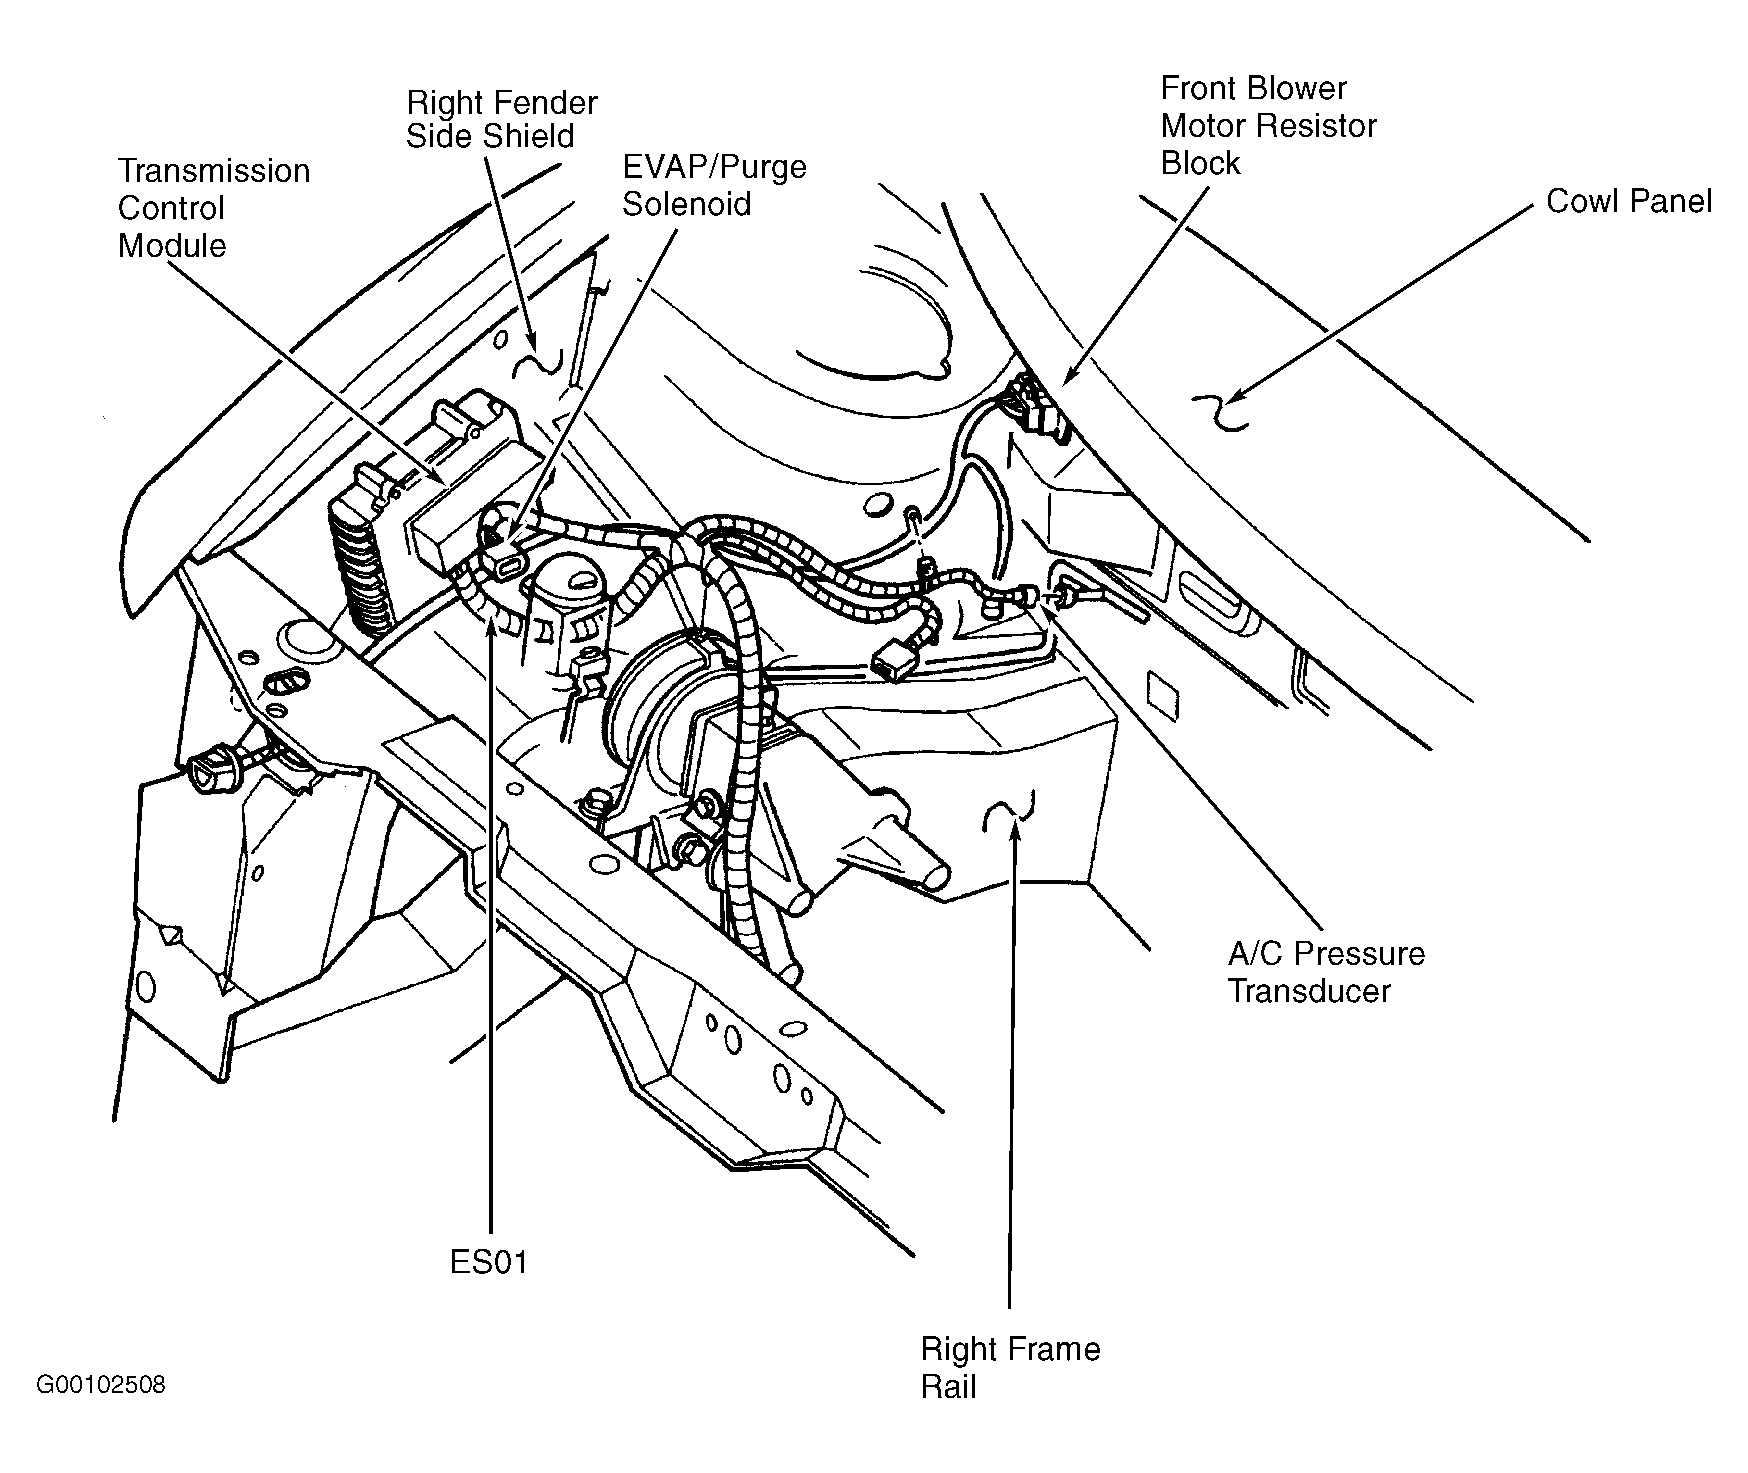 Dodge Caravan SE 1997 - Component Locations -  Right Side Of Engine Compartment